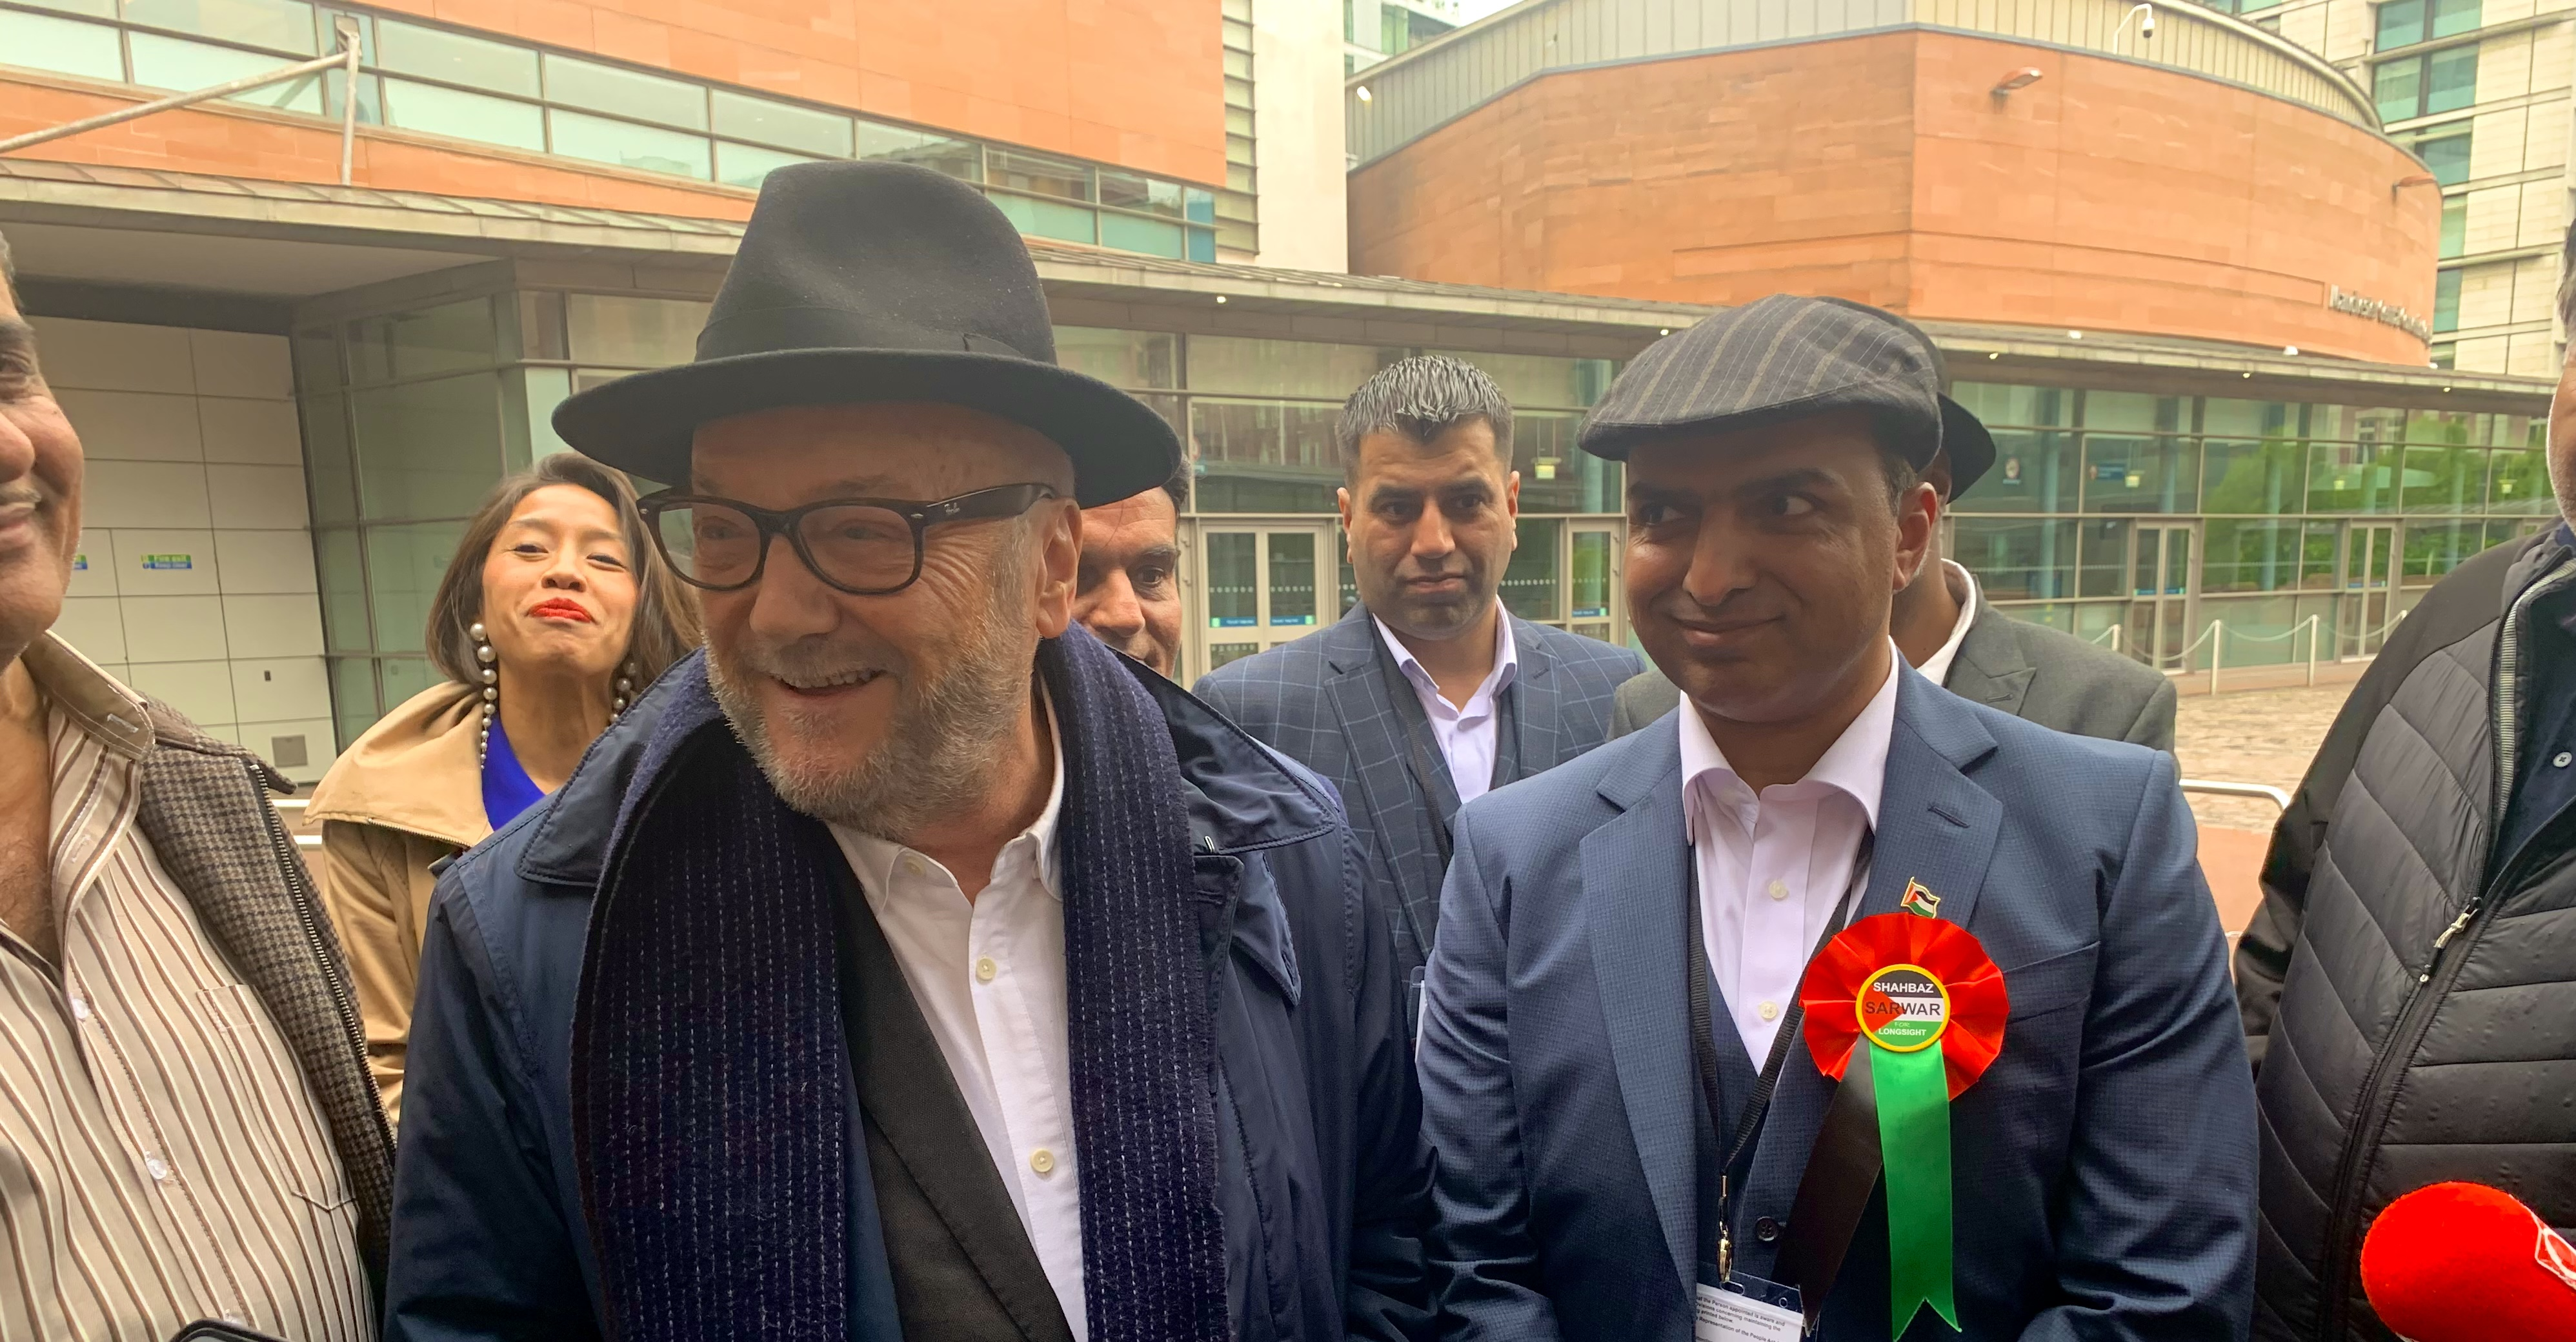 Workers' Party for Britain founder and leader George Galloway stands to the left of winning Workers' Party councillor Shabas Sarwar. Both are smiling, and Galloway is leaning towards a reporter while answering a question. They are stood outside - the walls of the Manchester Conference Hall are visible in the background.